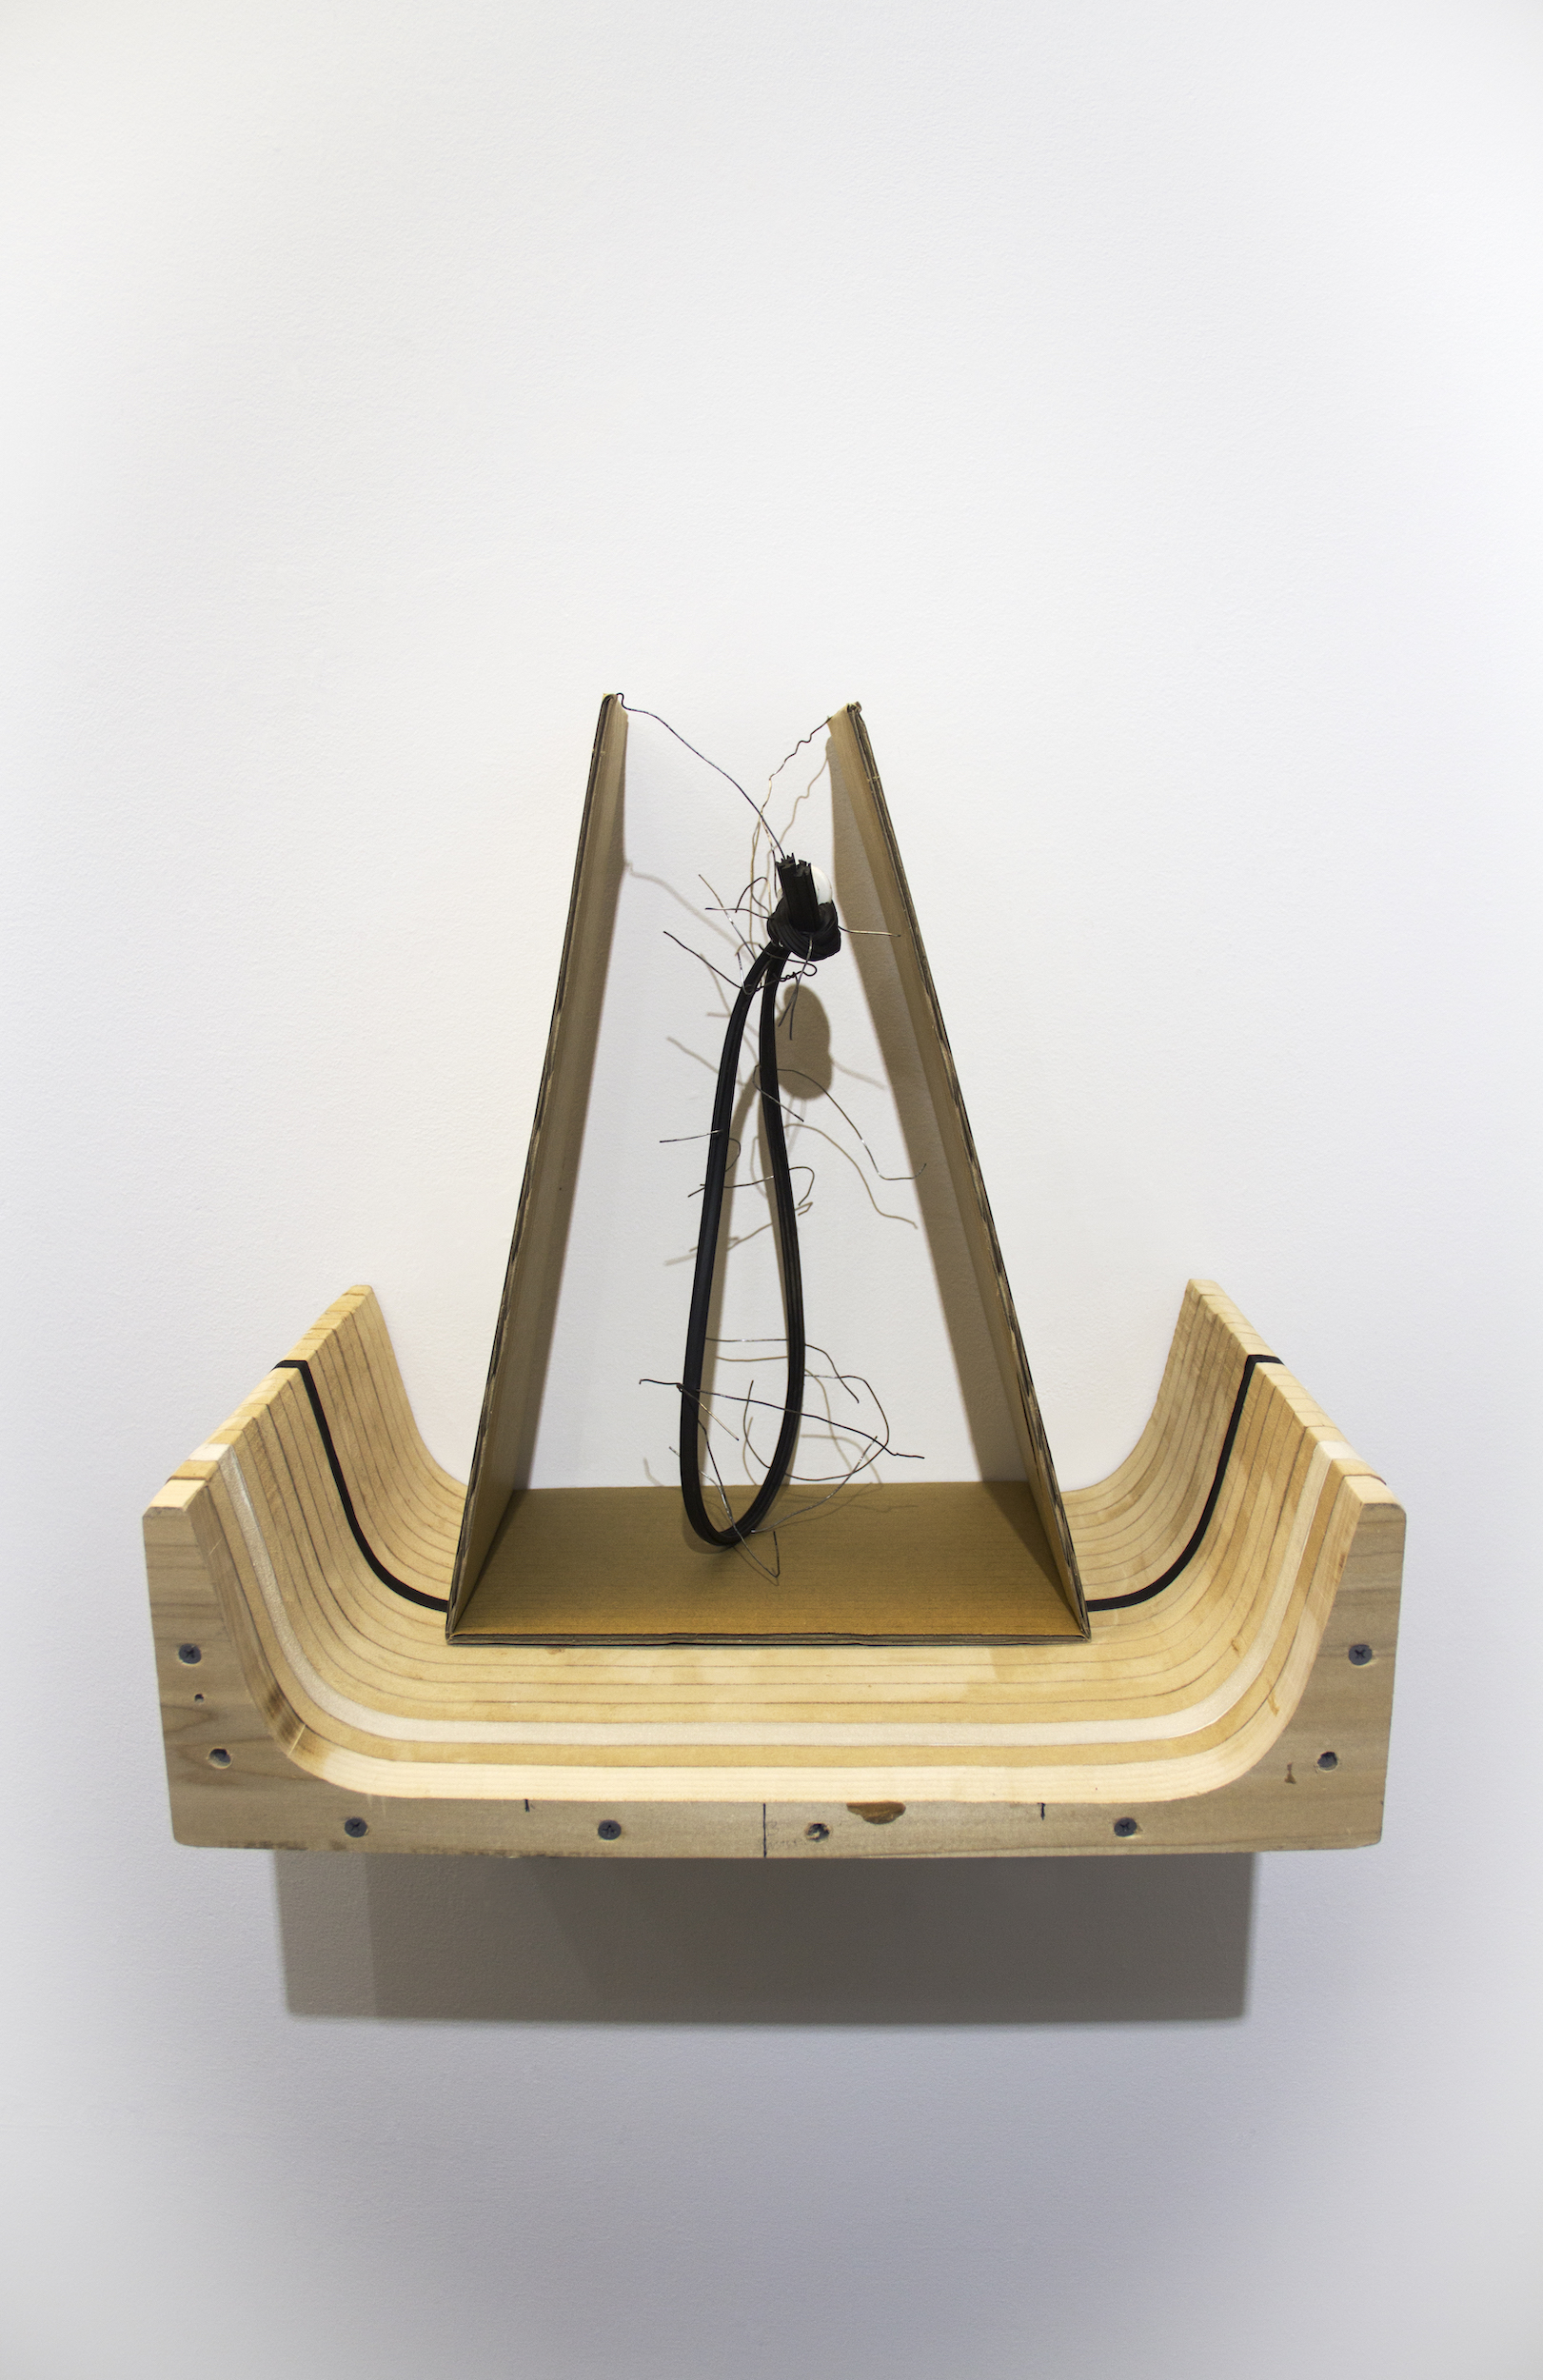    The cradle    Used wire from funeral tent and cardboard packaging; found wooden structure, rubber tubing, plastic knob; and acrylic paint  Approx. 17 6/8 x 12 6/8 x 16 1/2 inches  2019 